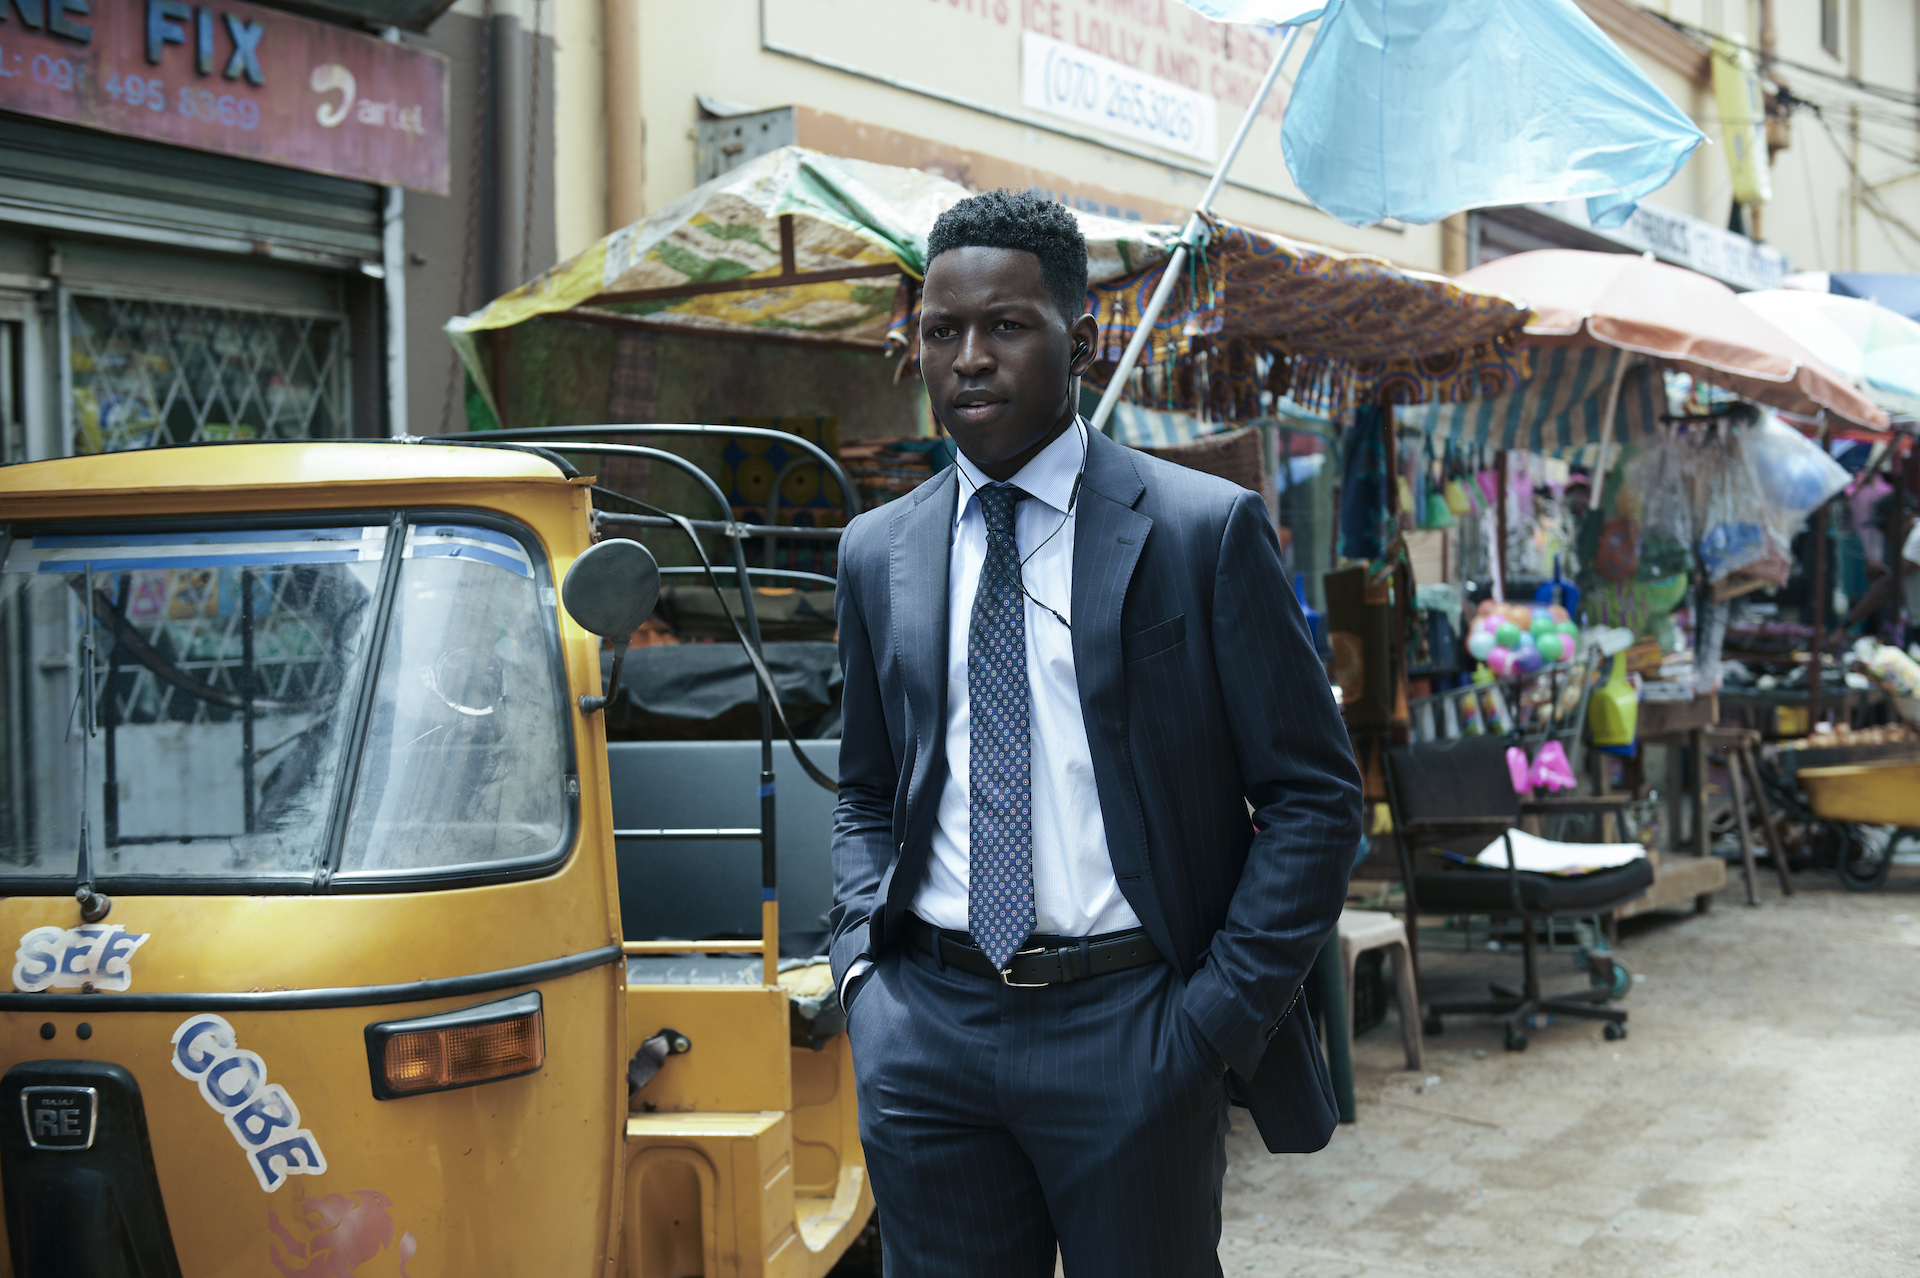 Toheeb Jimoh as Tunde Ojo in 'The Power'. Image: courtesy of Prime Video